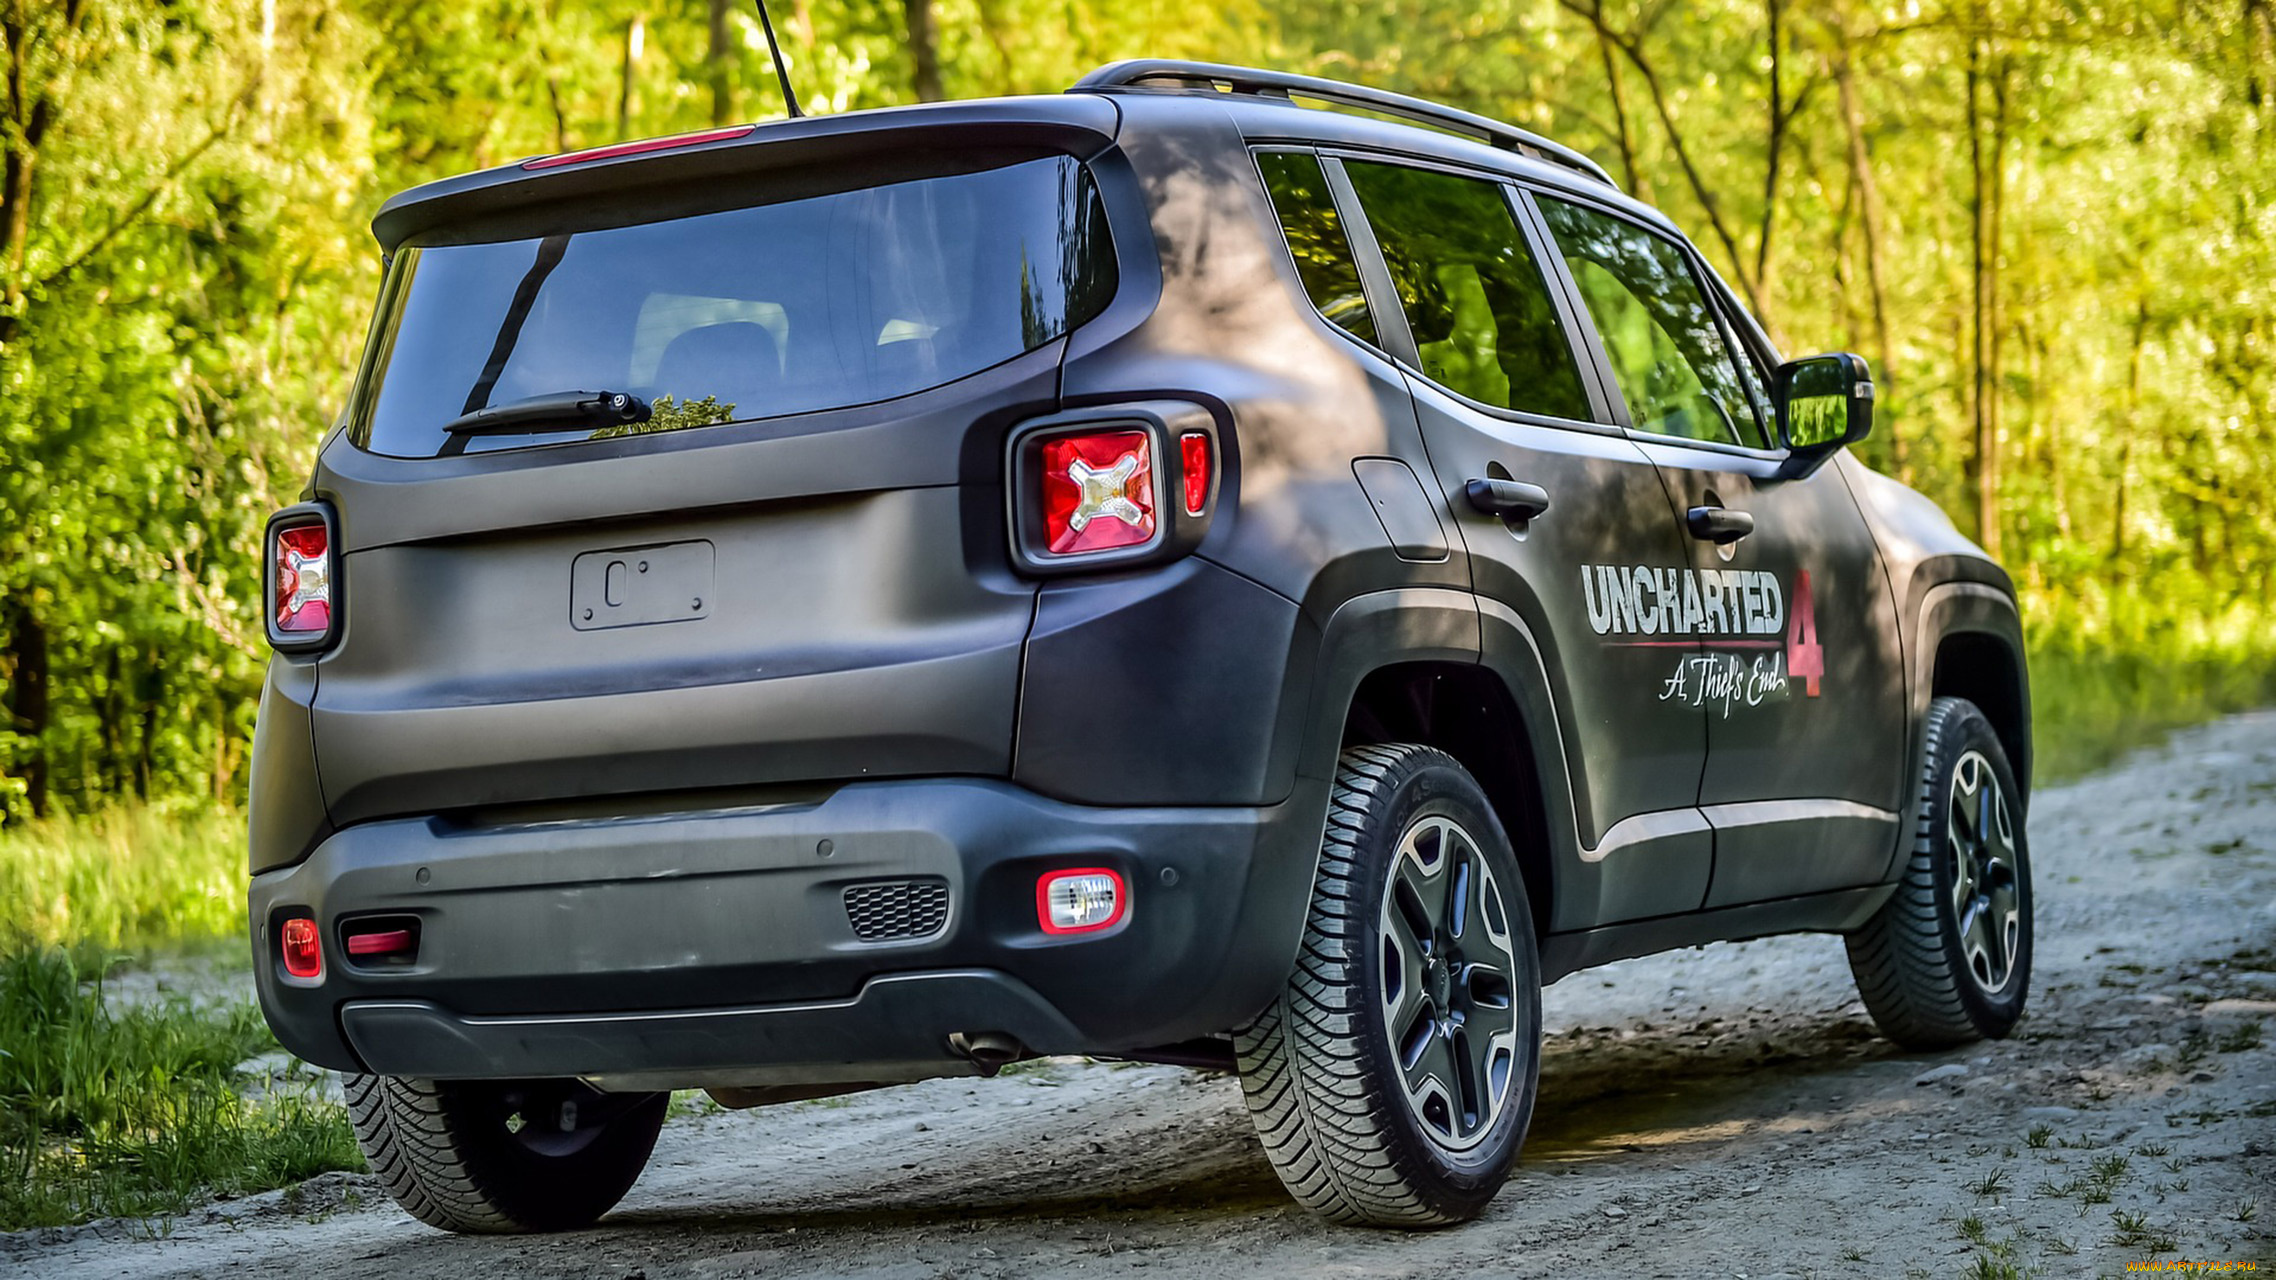 jeep, renegade, uncharted, edition, 2016, автомобили, jeep, 2016, edition, uncharted, renegade